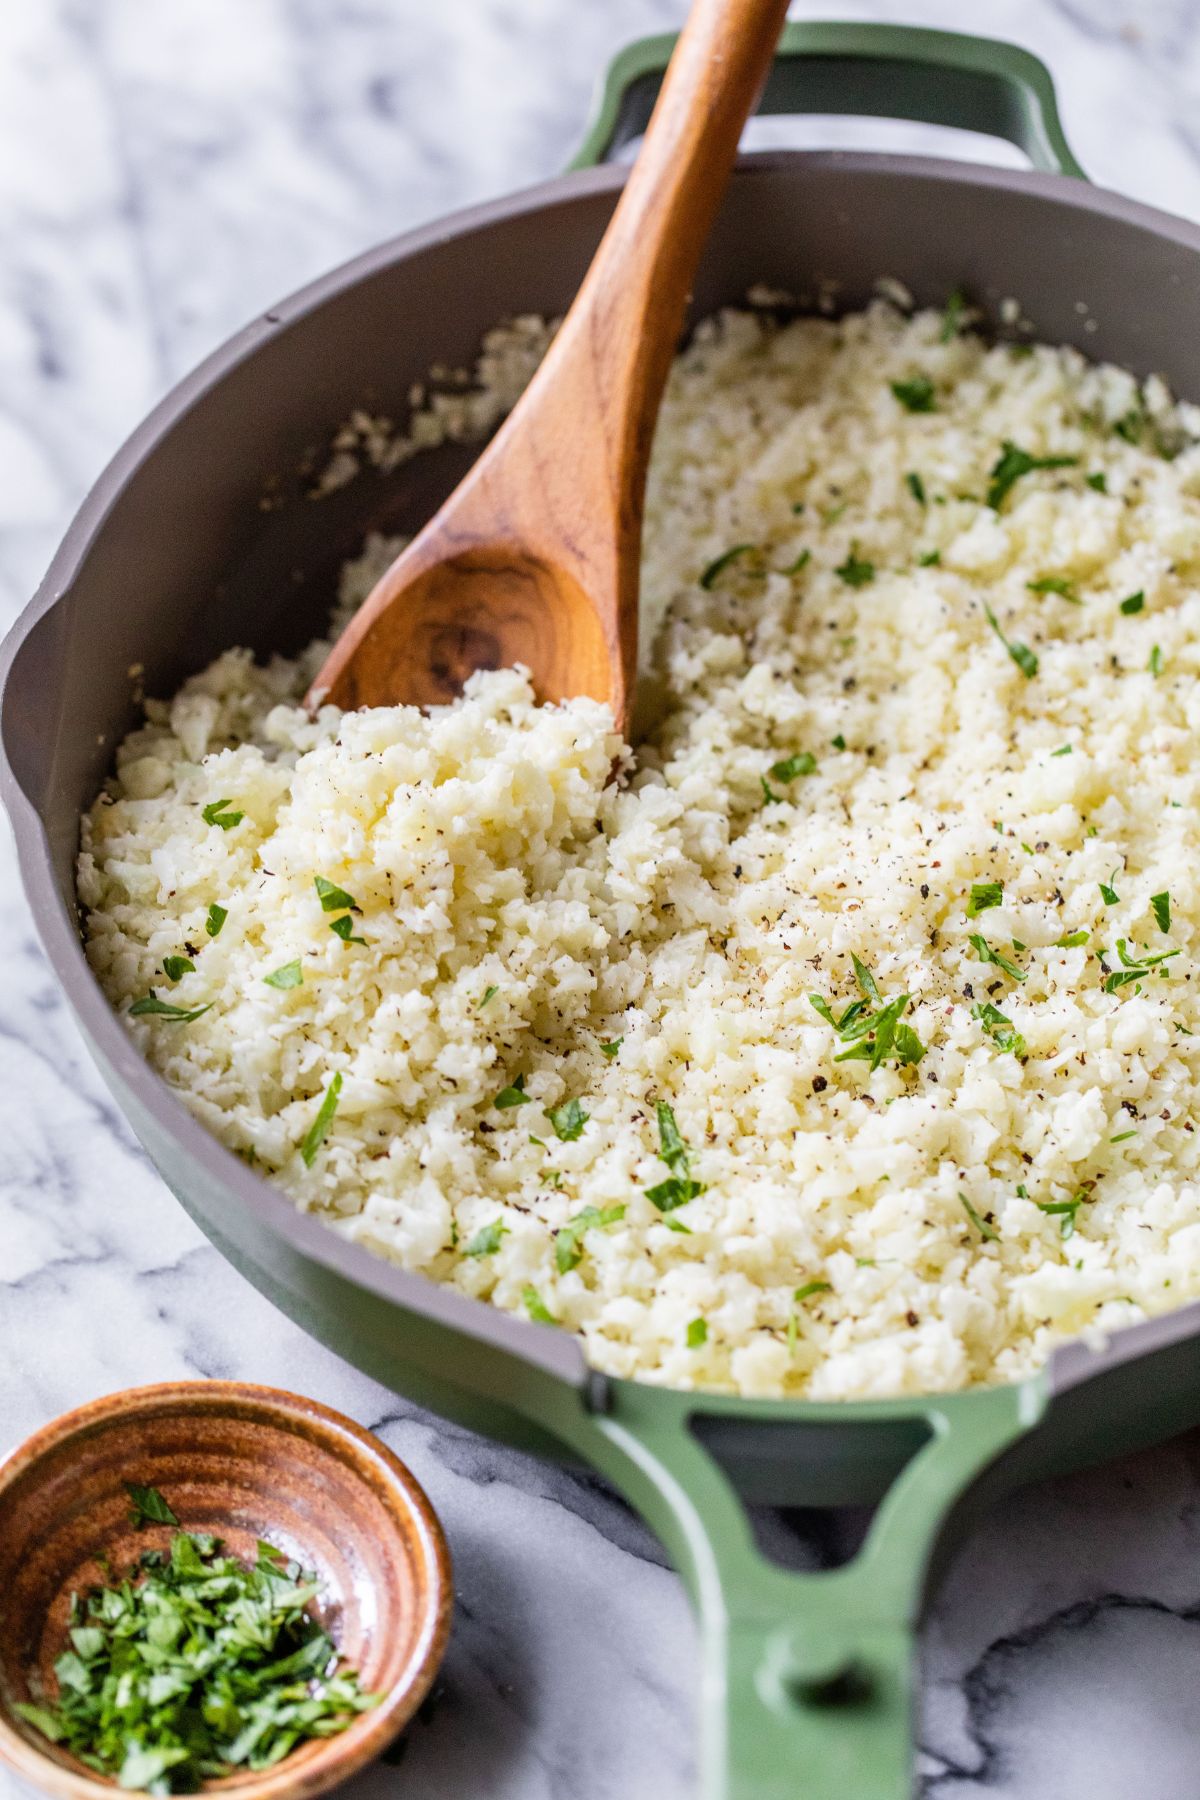 Cooking cauliflower rice in a skillet with a wooden spoon.